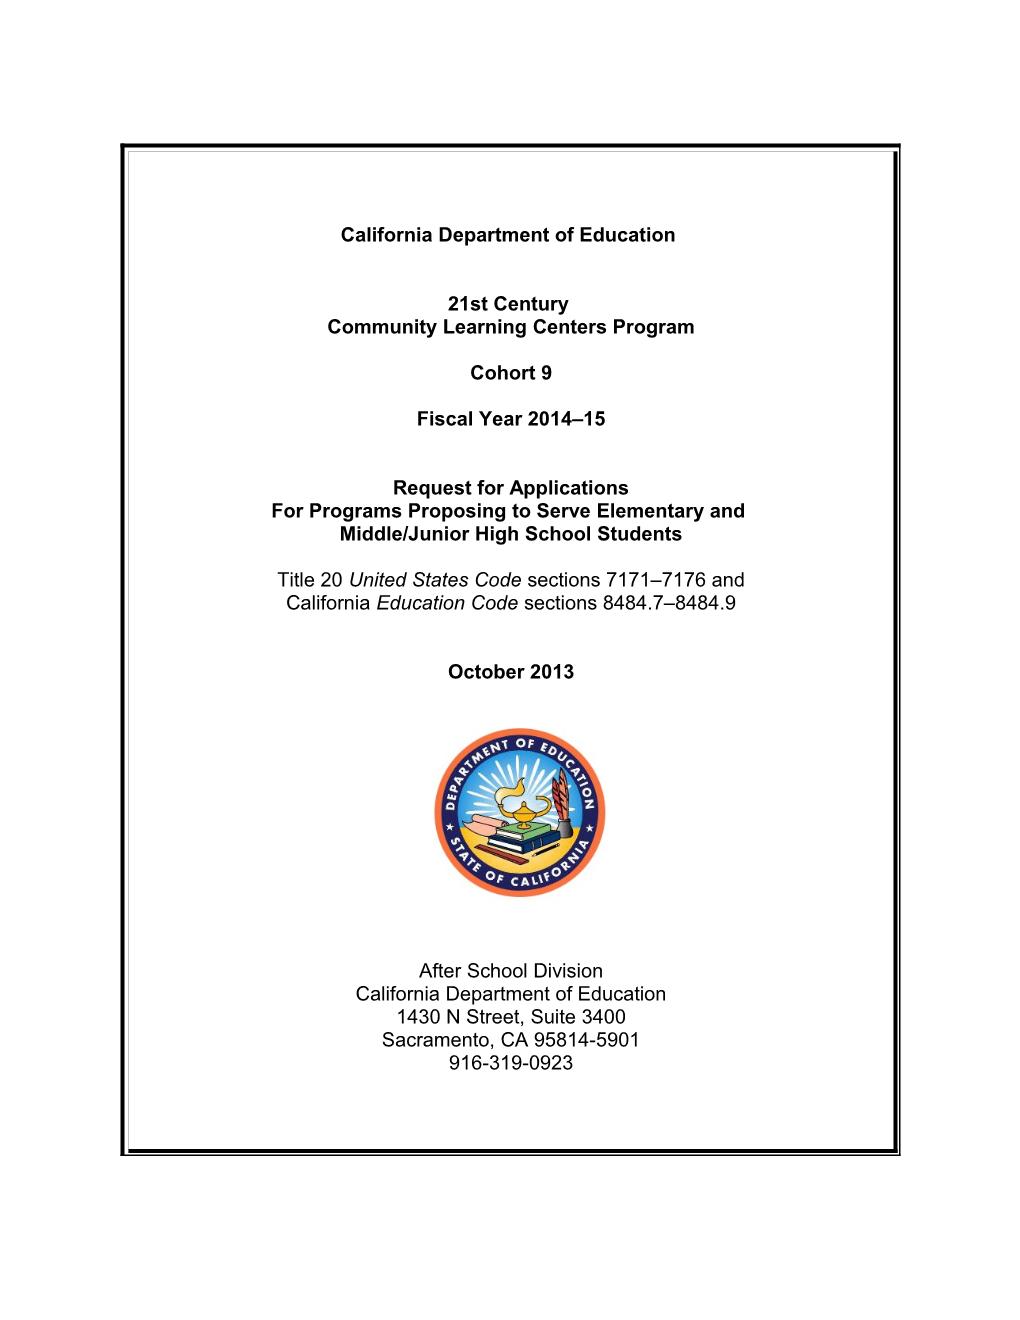 RFA-14: 21St CCLC - Elementary/Middle RFA (CA Dept of Education)